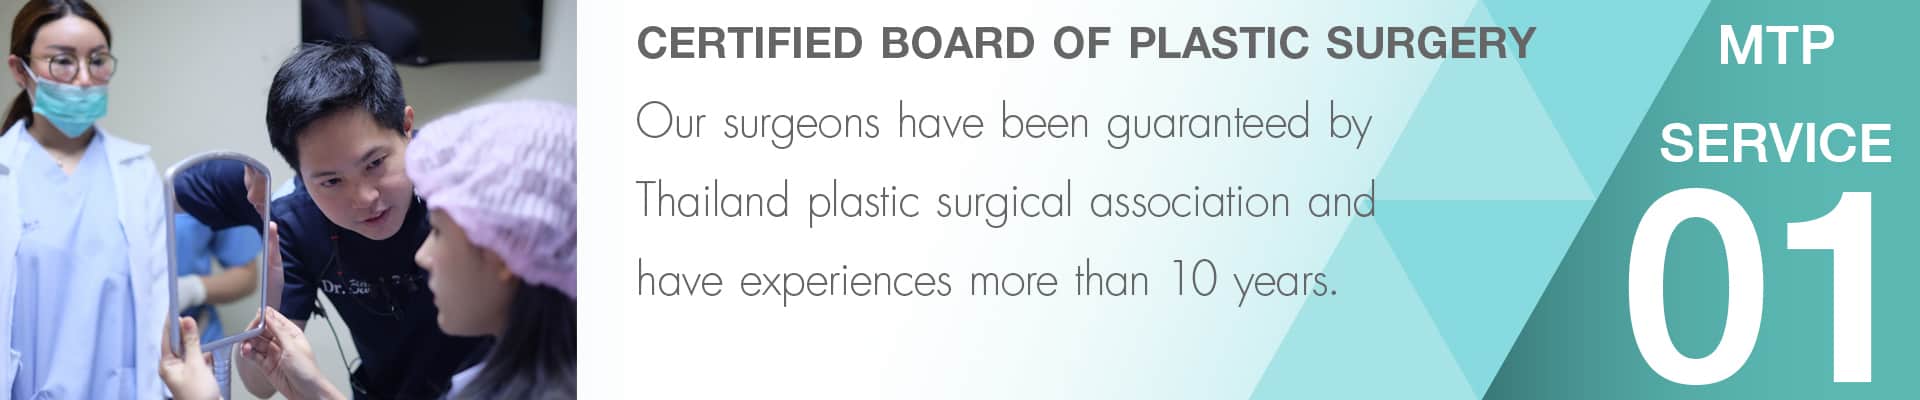 CERTIFIED BOARD OF PLASTIC SURGERY